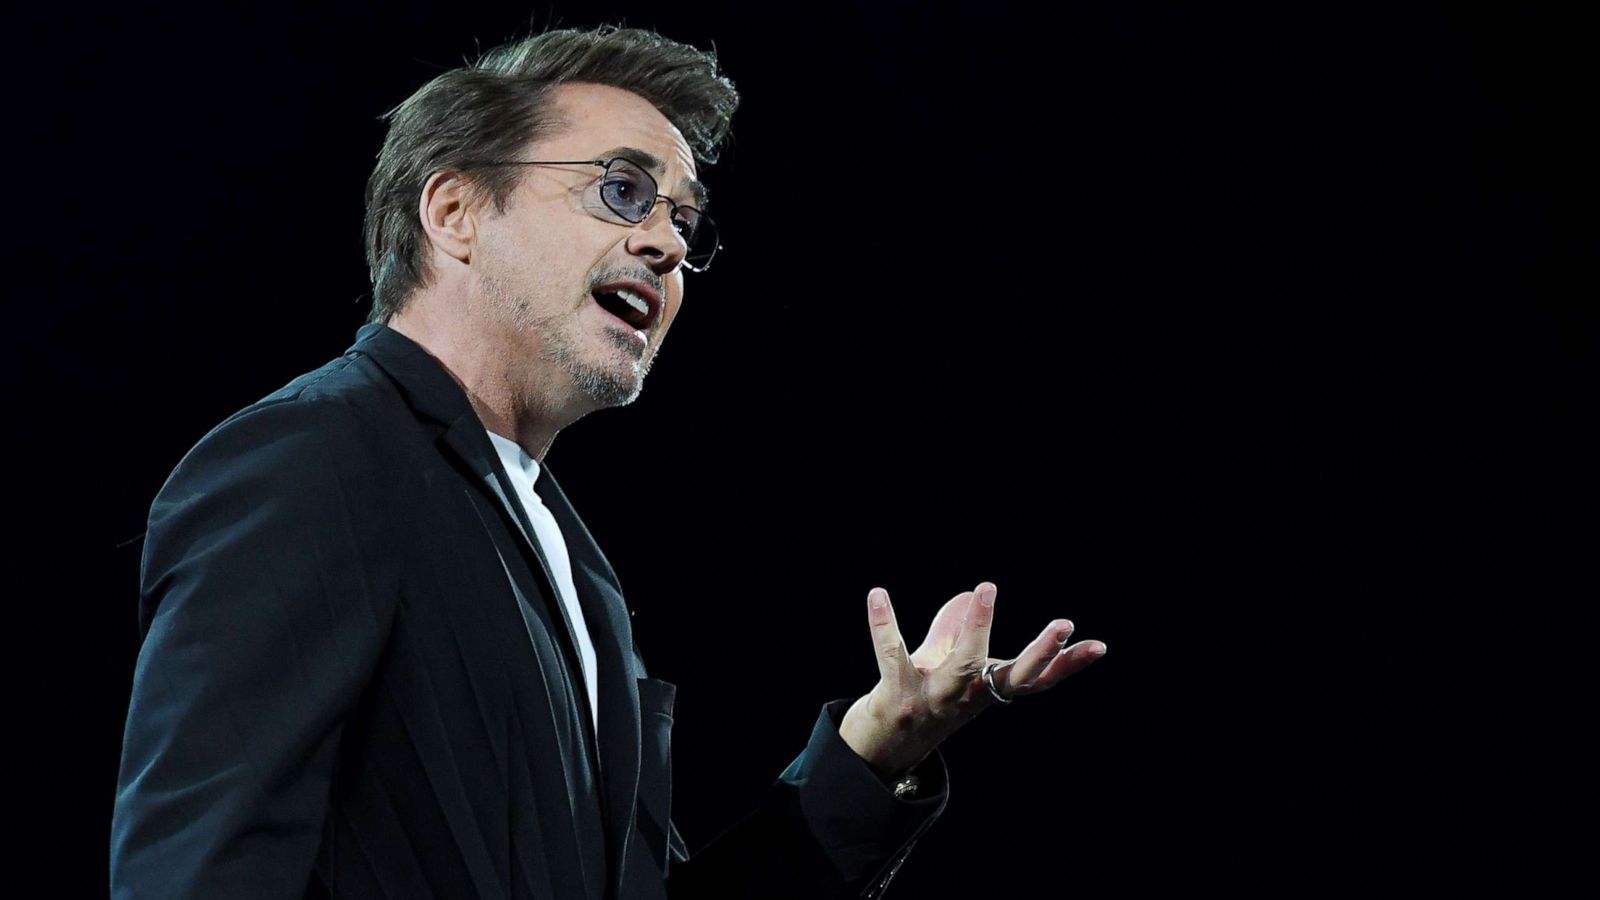 Robert Downey Jr.'s off-screen mission to keep kids and families